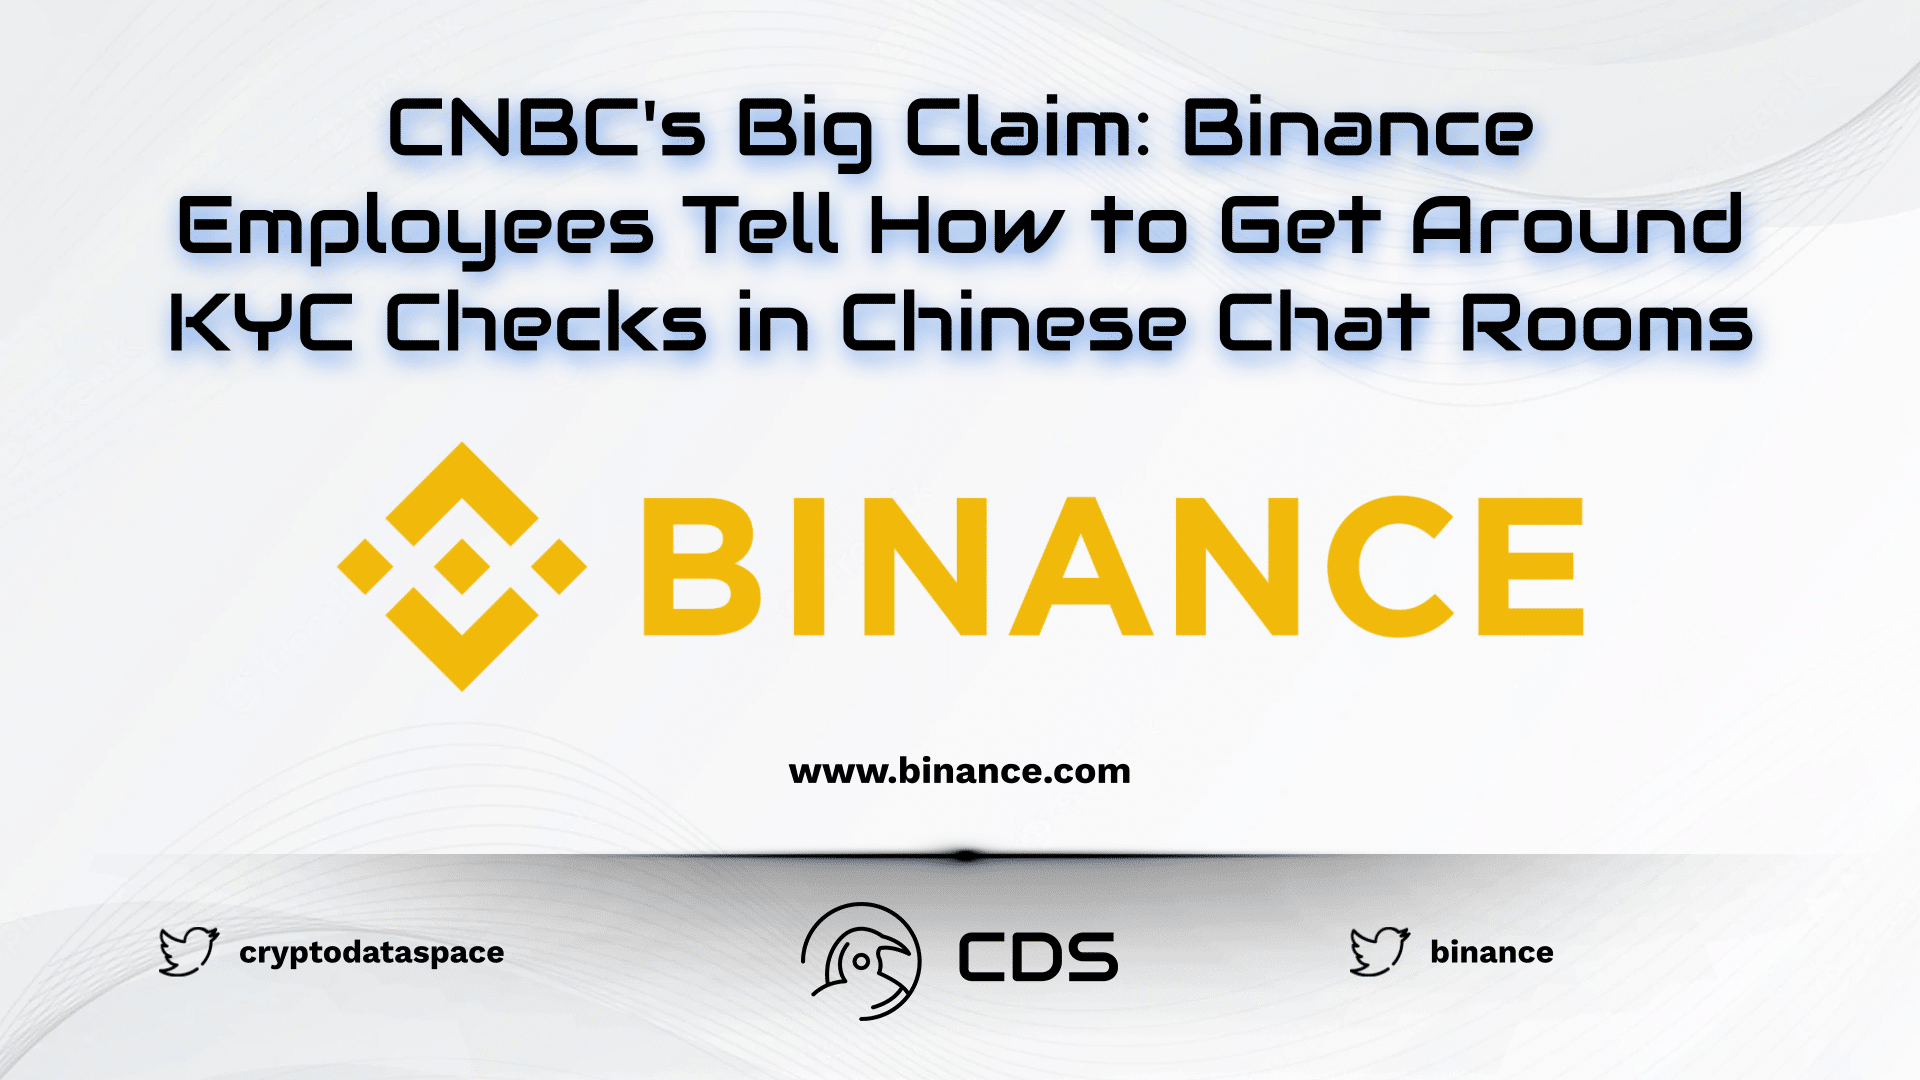 CNBC's Big Claim Binance Employees Tell How to Get Around KYC Checks in Chinese Chat Rooms